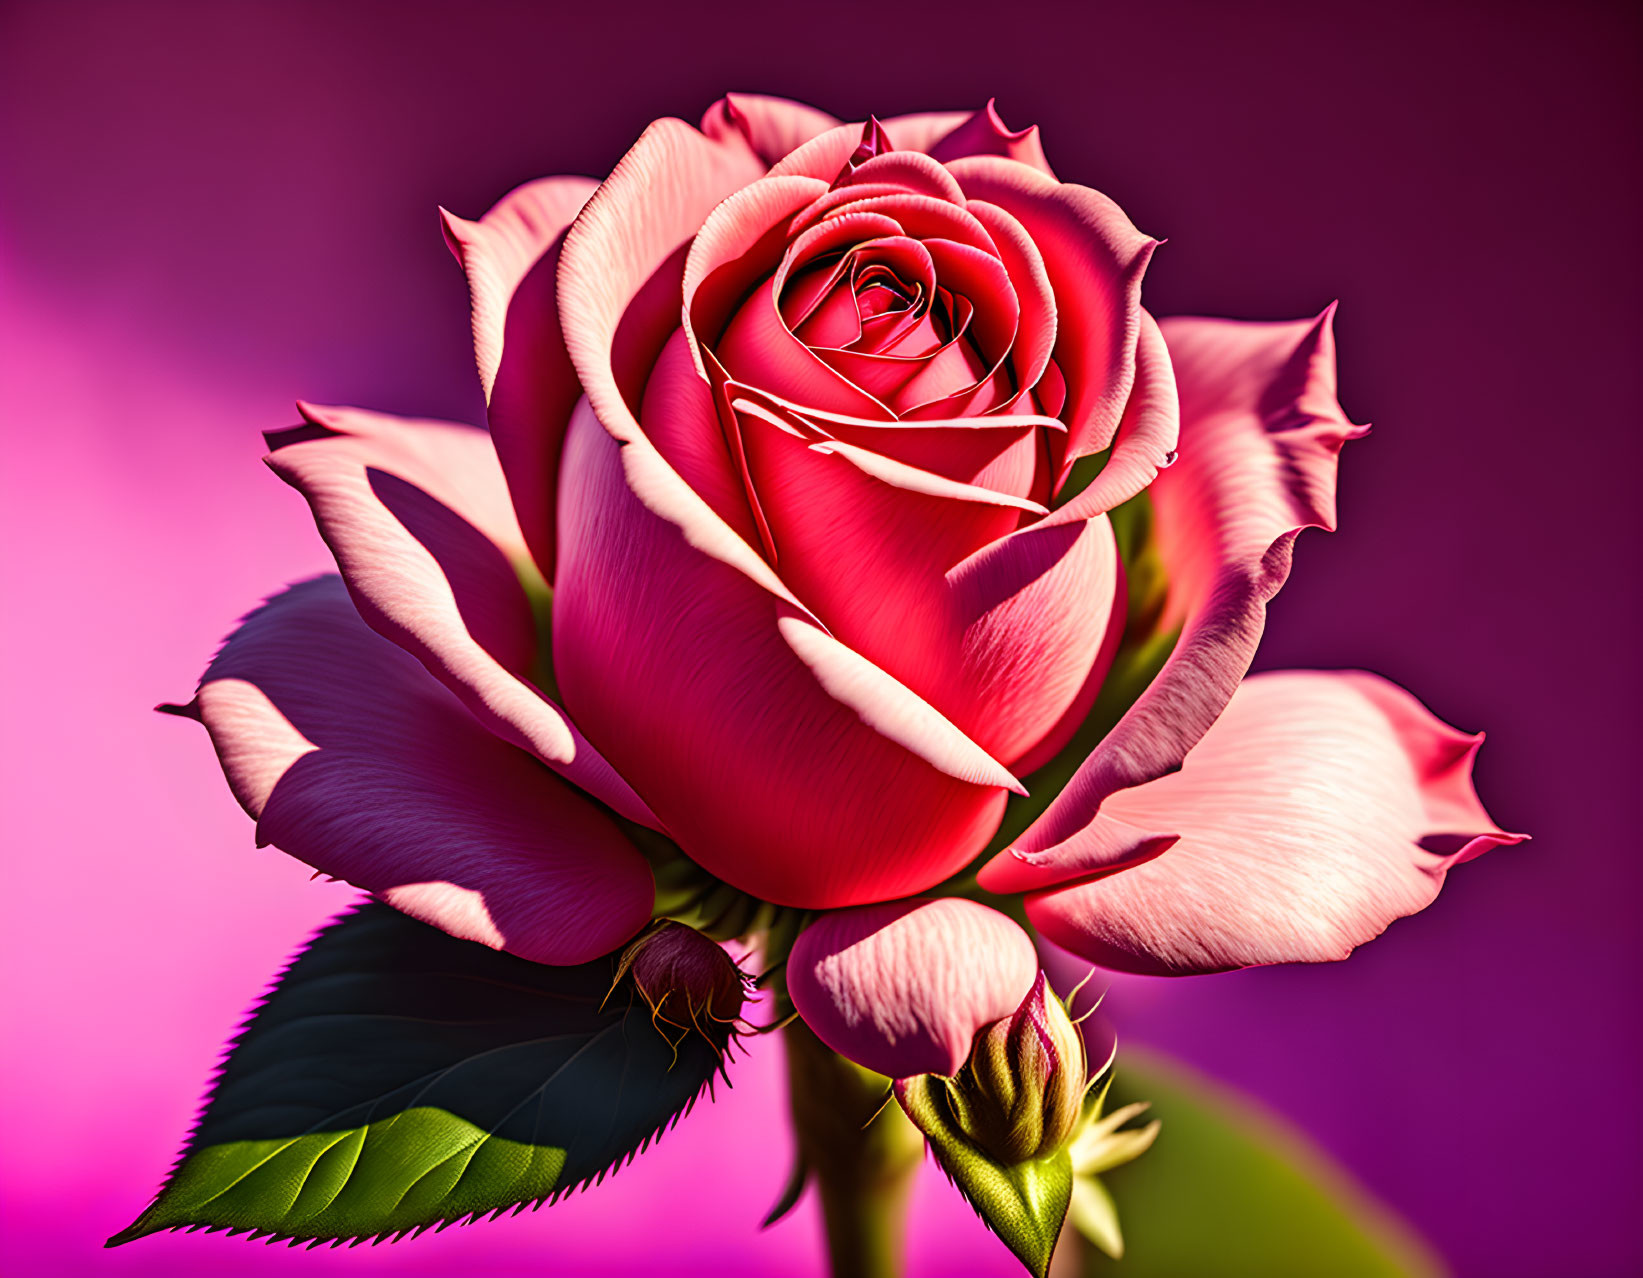 Vibrant pink rose with delicate petals on purple background